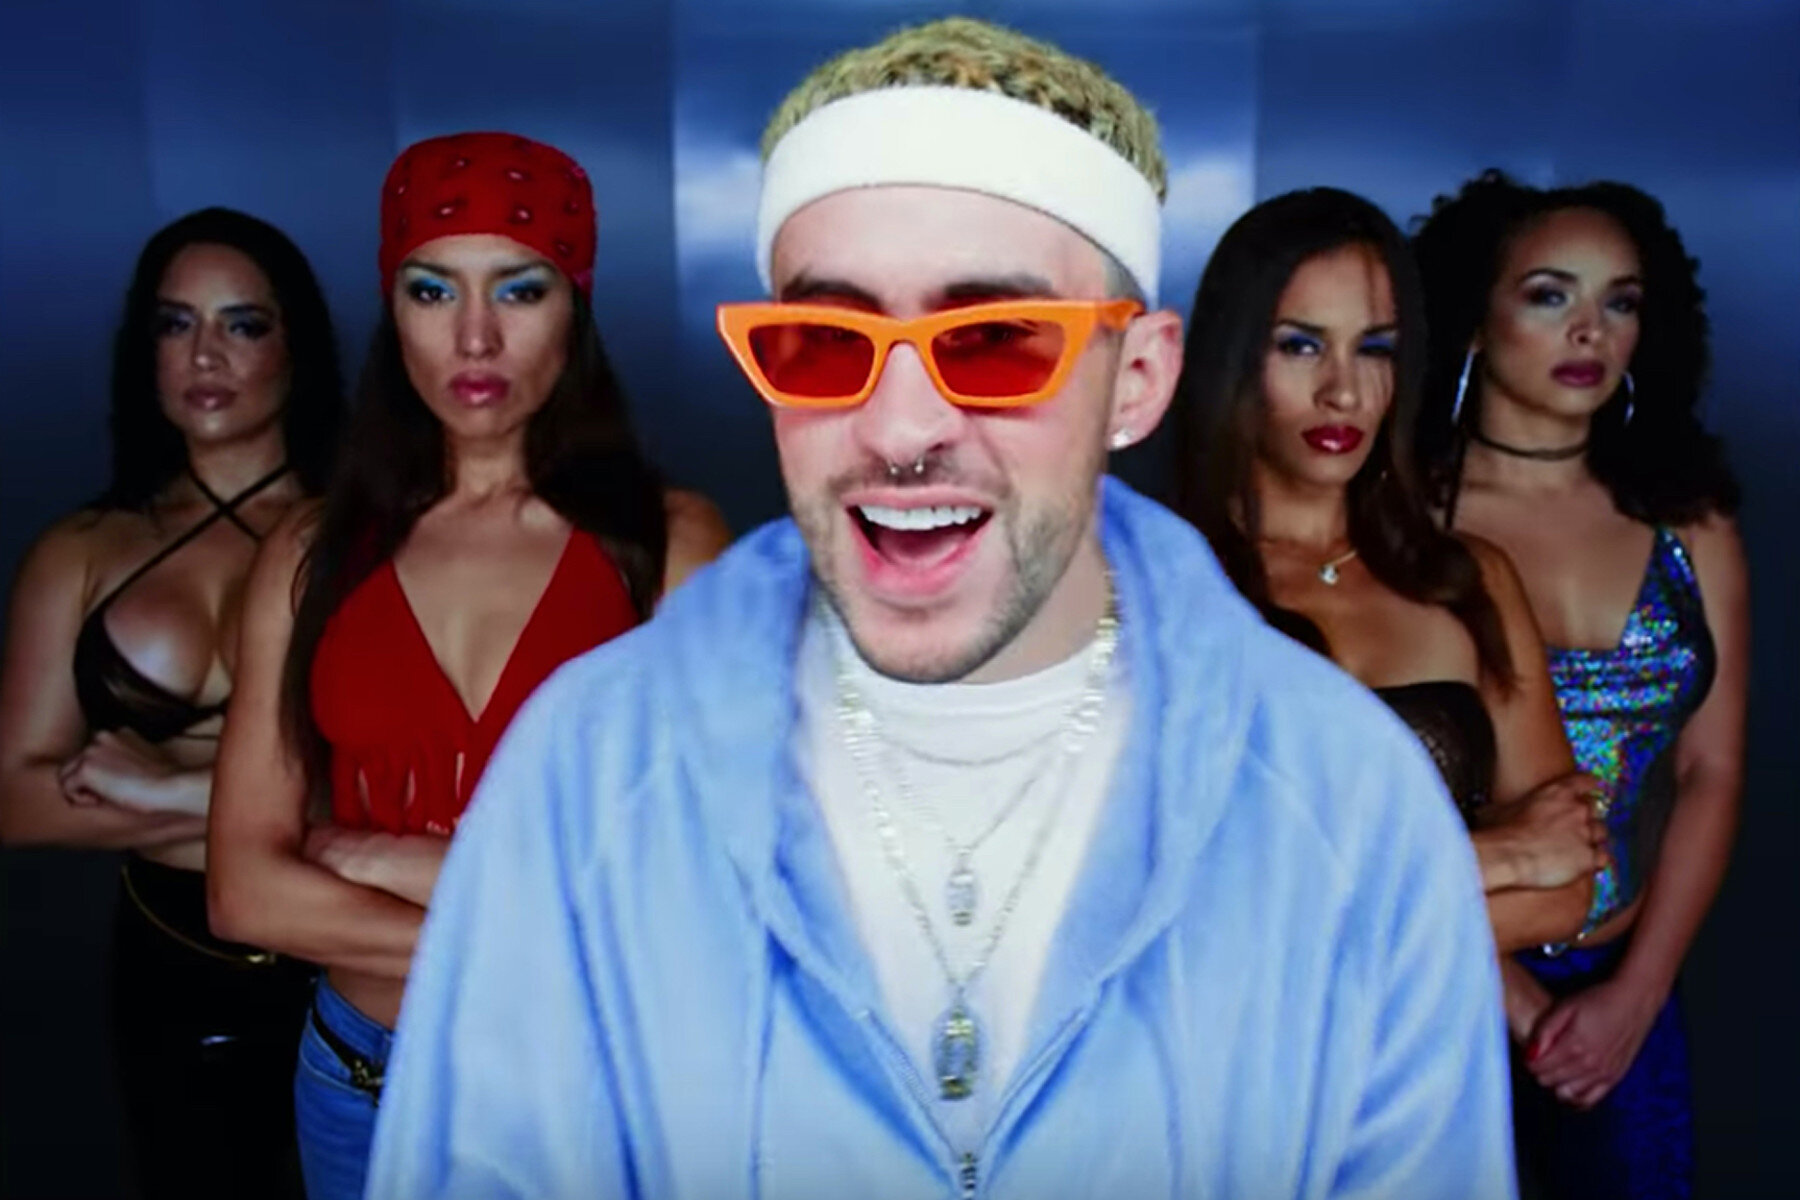 Album Review: Bad Bunny’s Sophomore Album 'YHLQMDLG' Does Just Th...